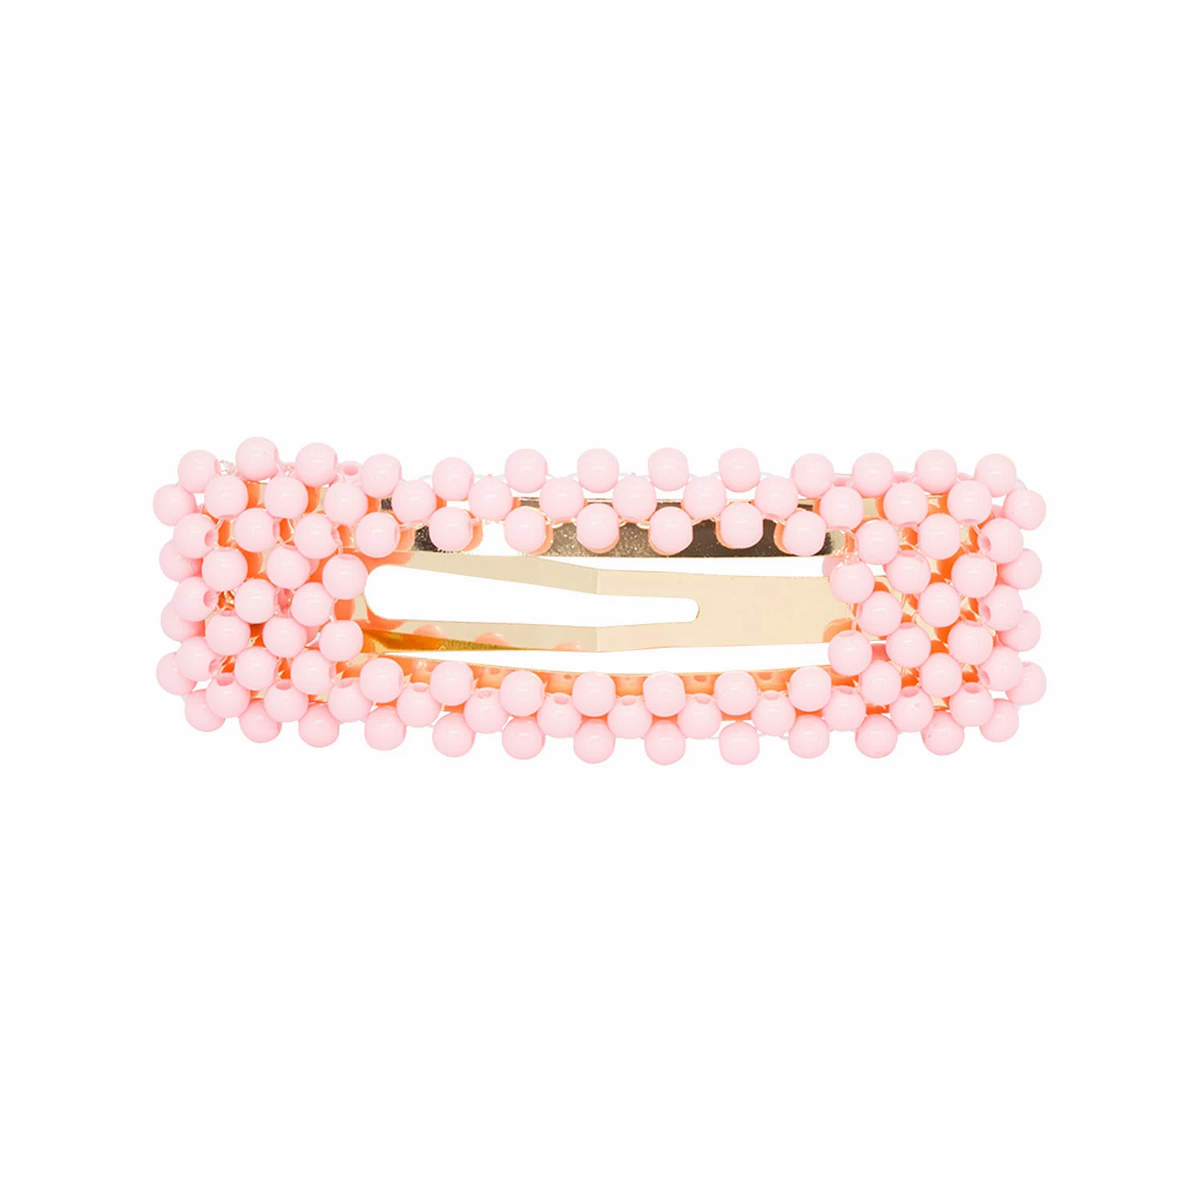 Pearled Pink Rounded Hairpin